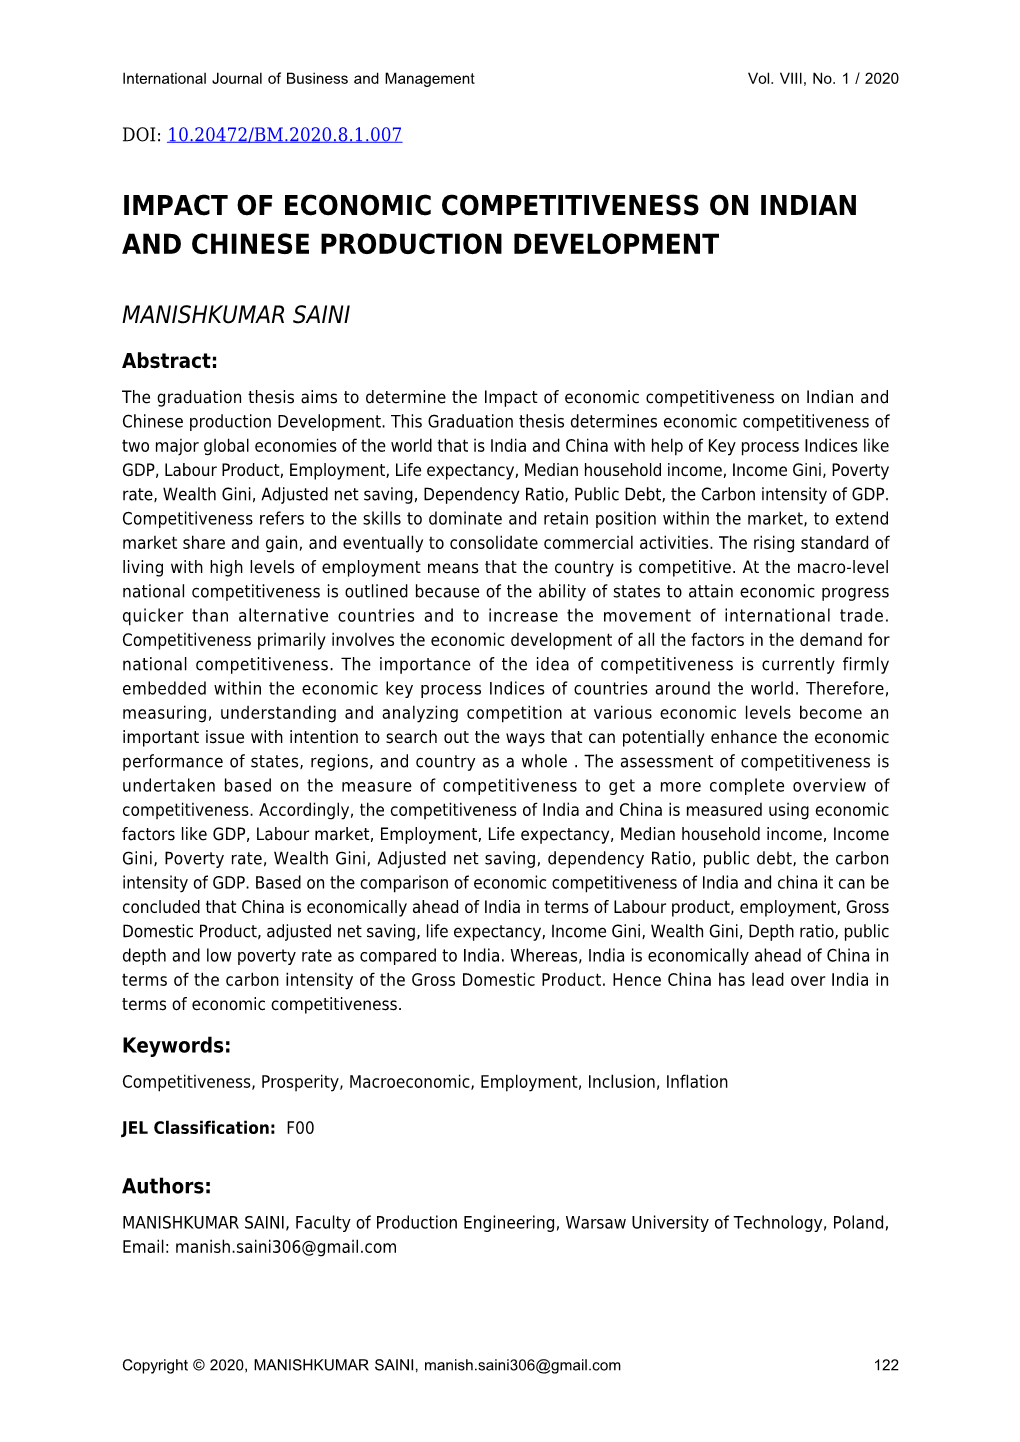 Impact of Economic Competitiveness on Indian and Chinese Production Development